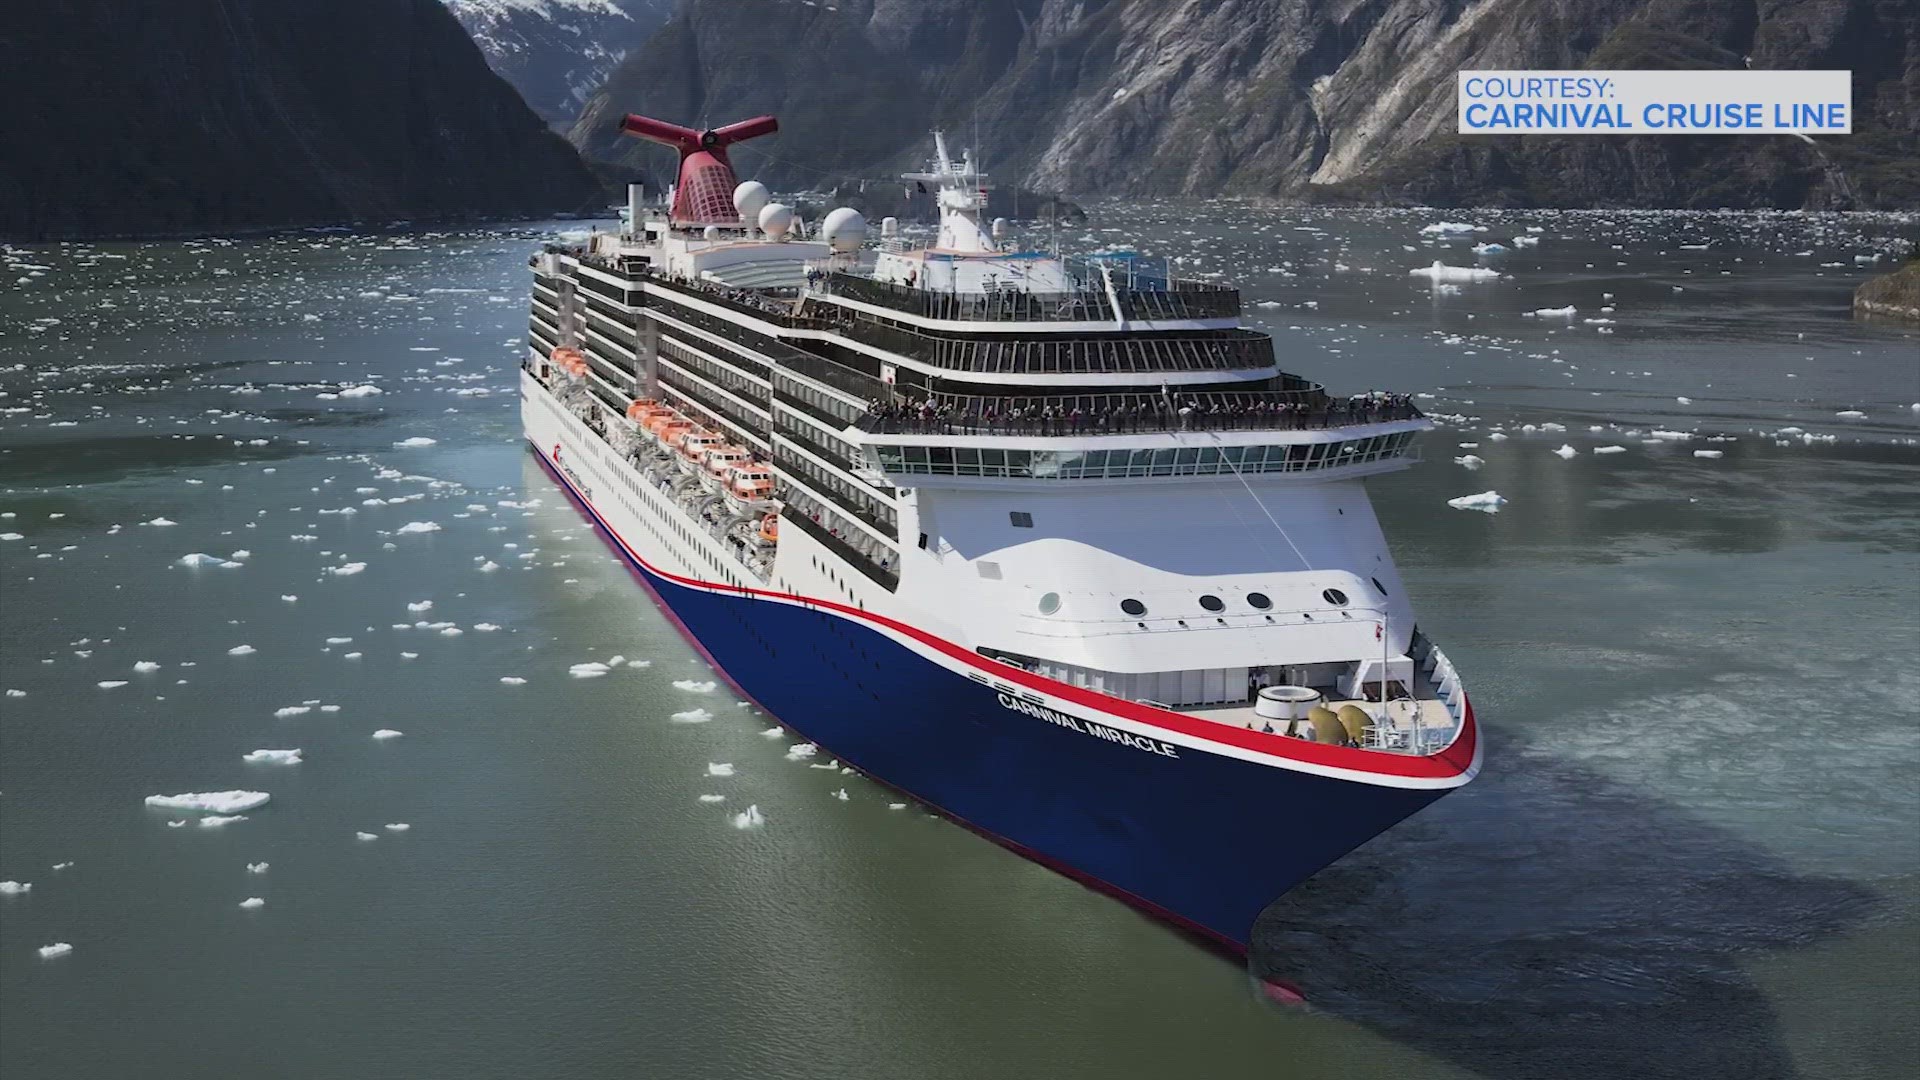 Big cruise news! Two more Carnival ships will soon be available out of Galveston and both will offer longer cruises.